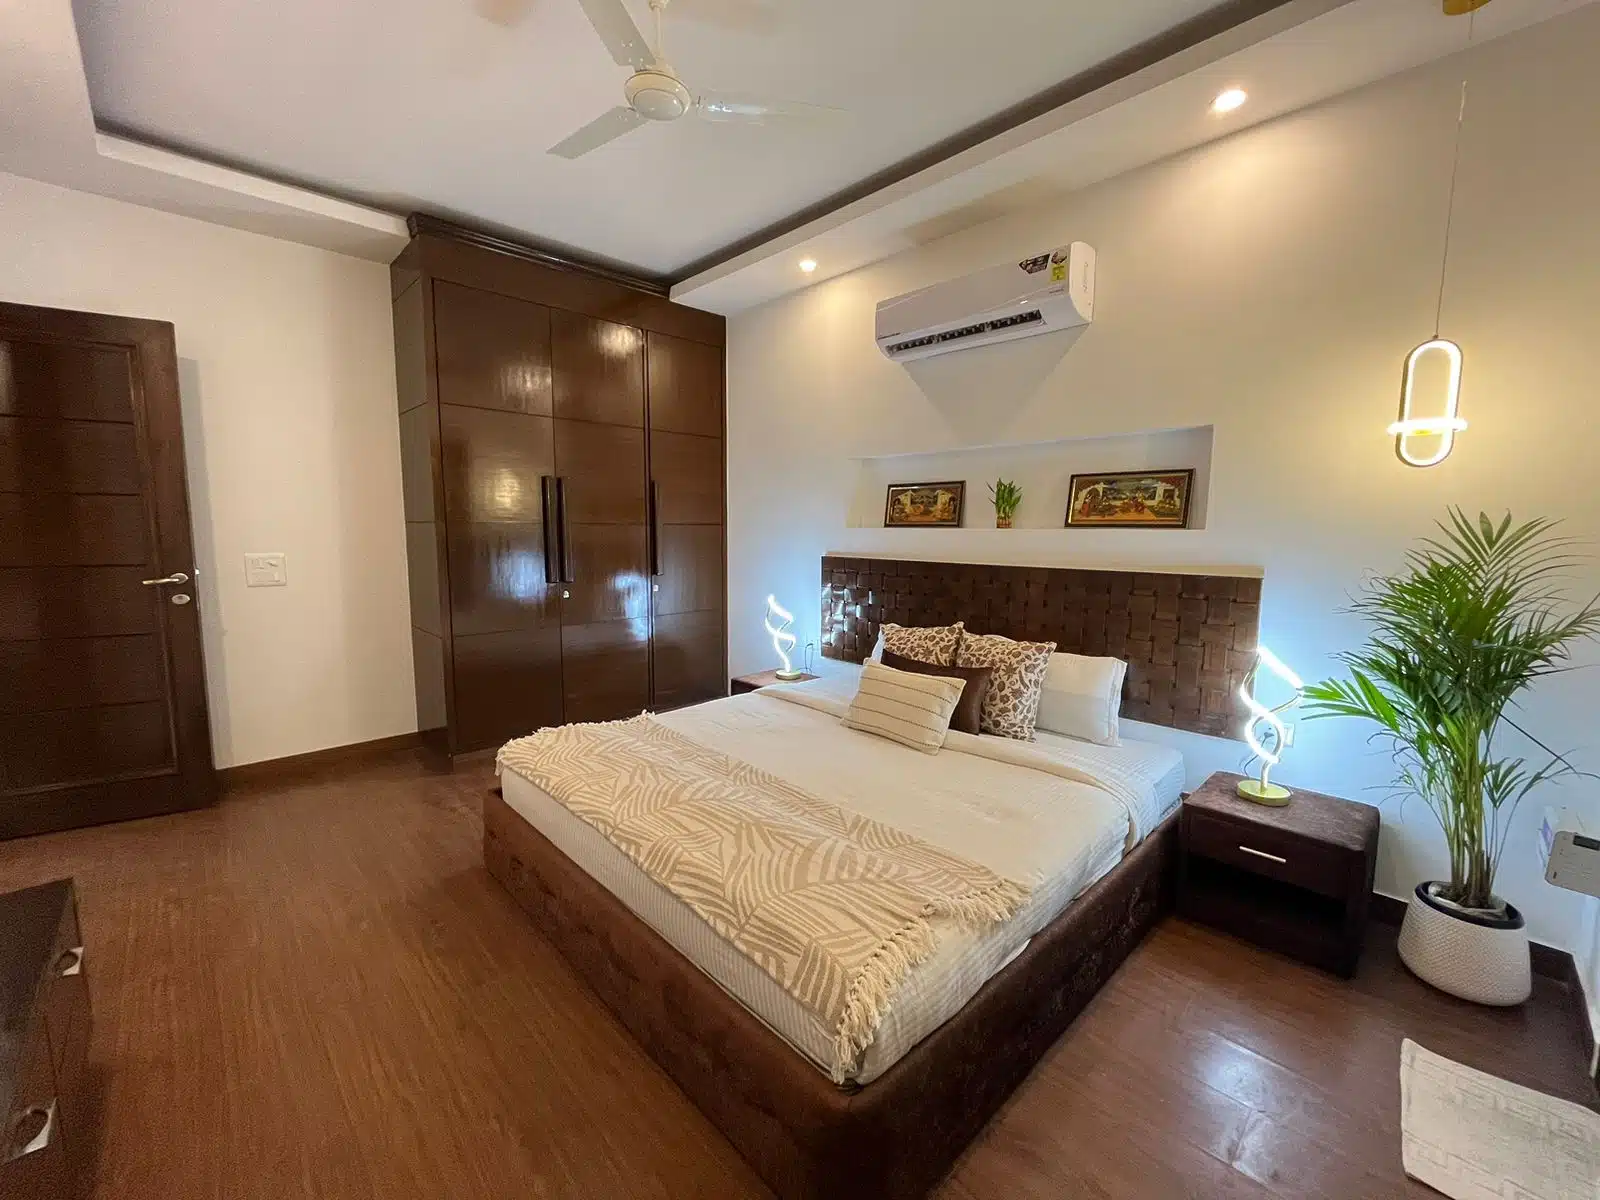 Bedroom of 3 BHK Bedchambers Service Apartment SOuth Extension